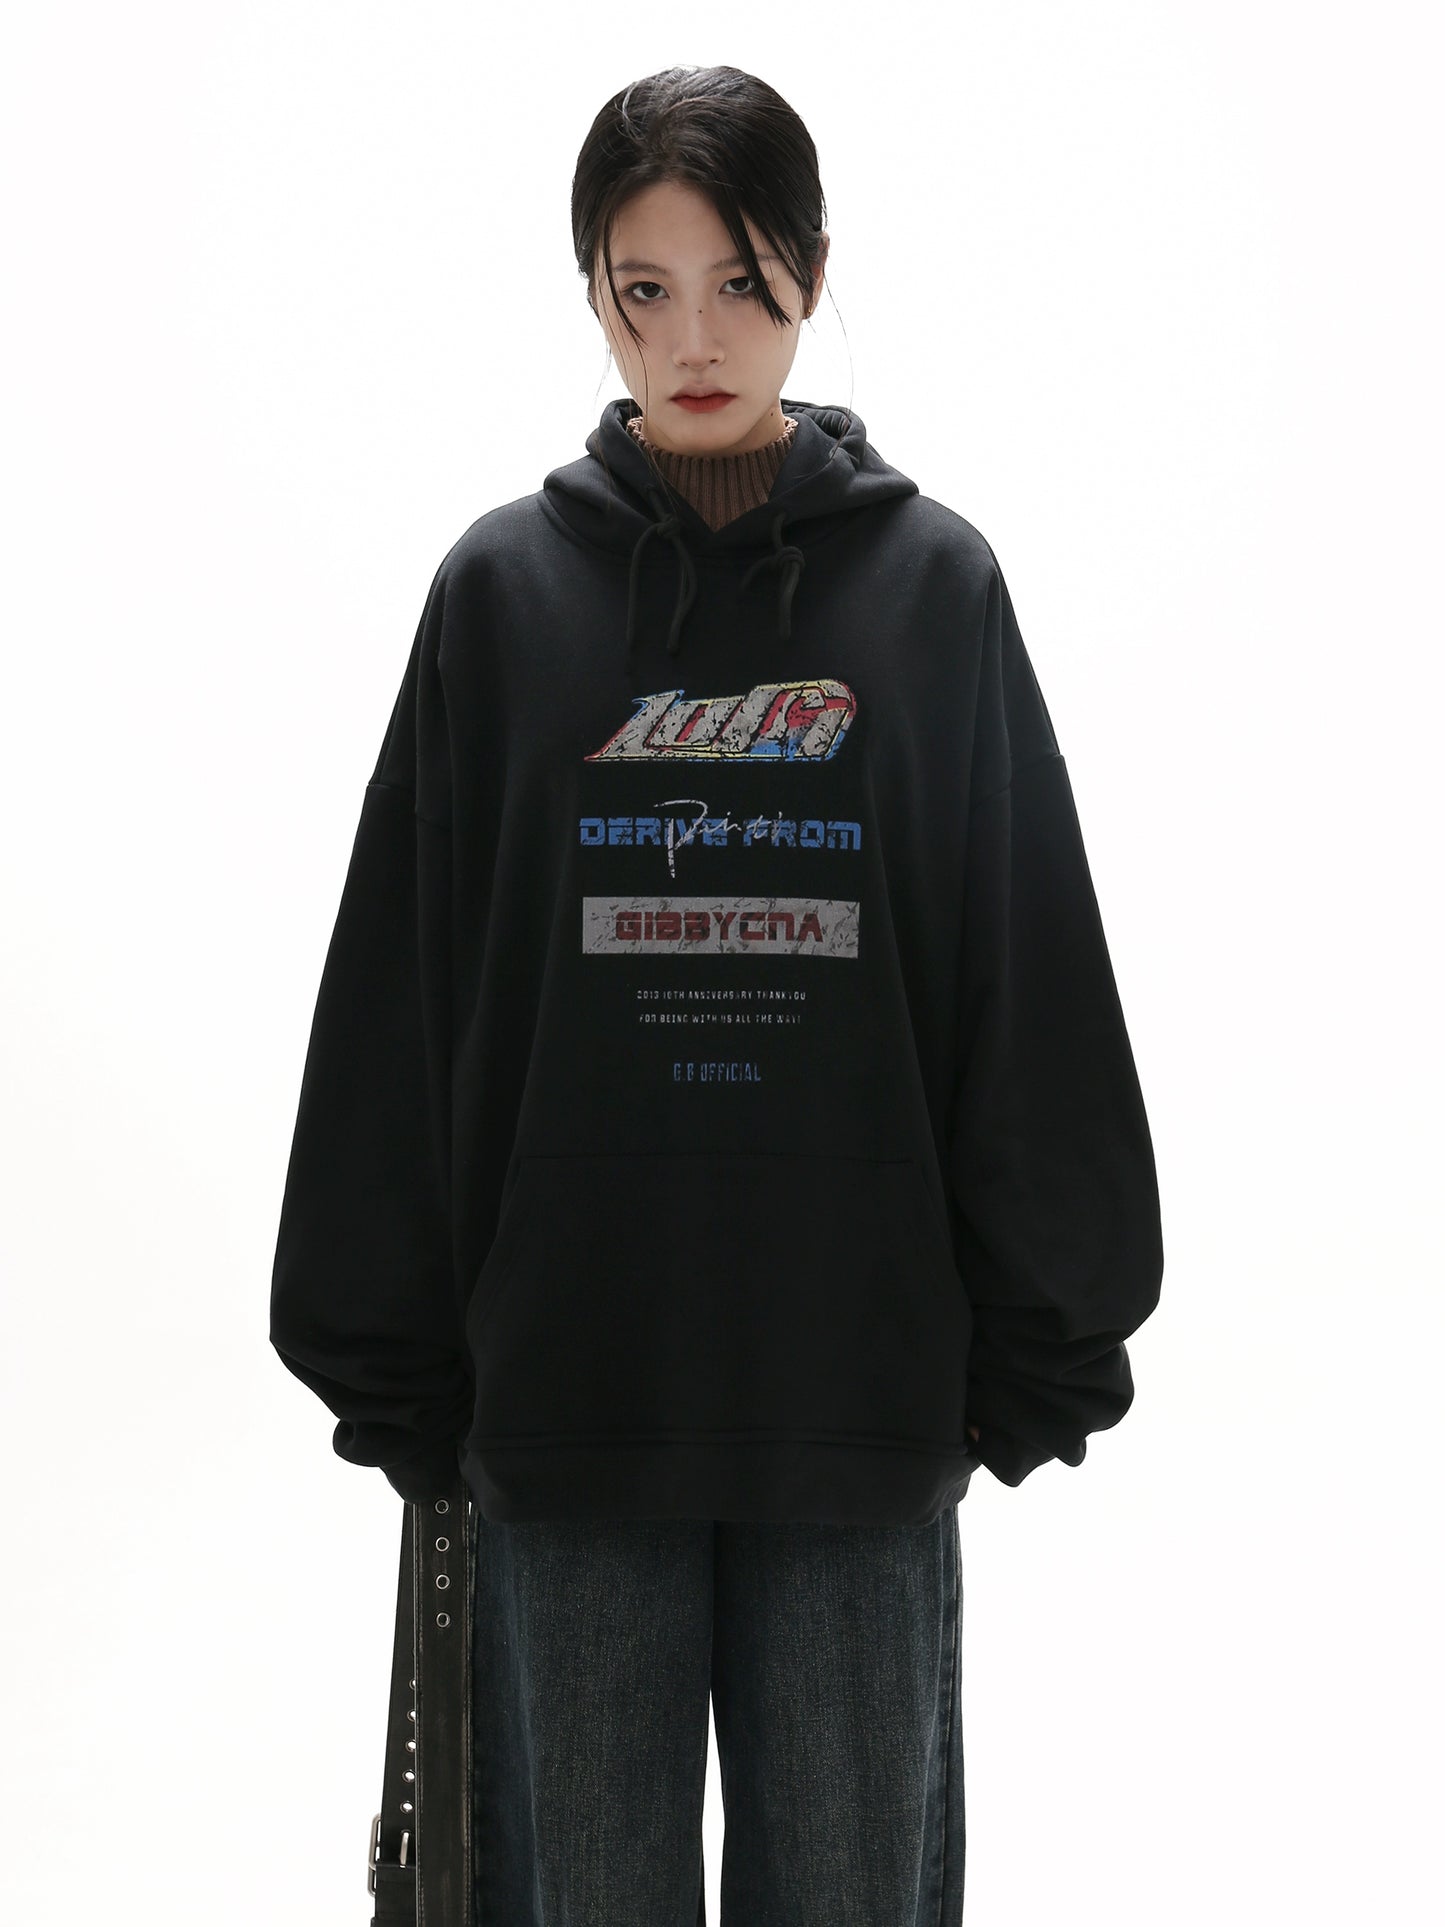 GIBBYCNA Self-control! Autumn and winter retro distressed shabby printed loose and thickened casual sweatshirt with hat